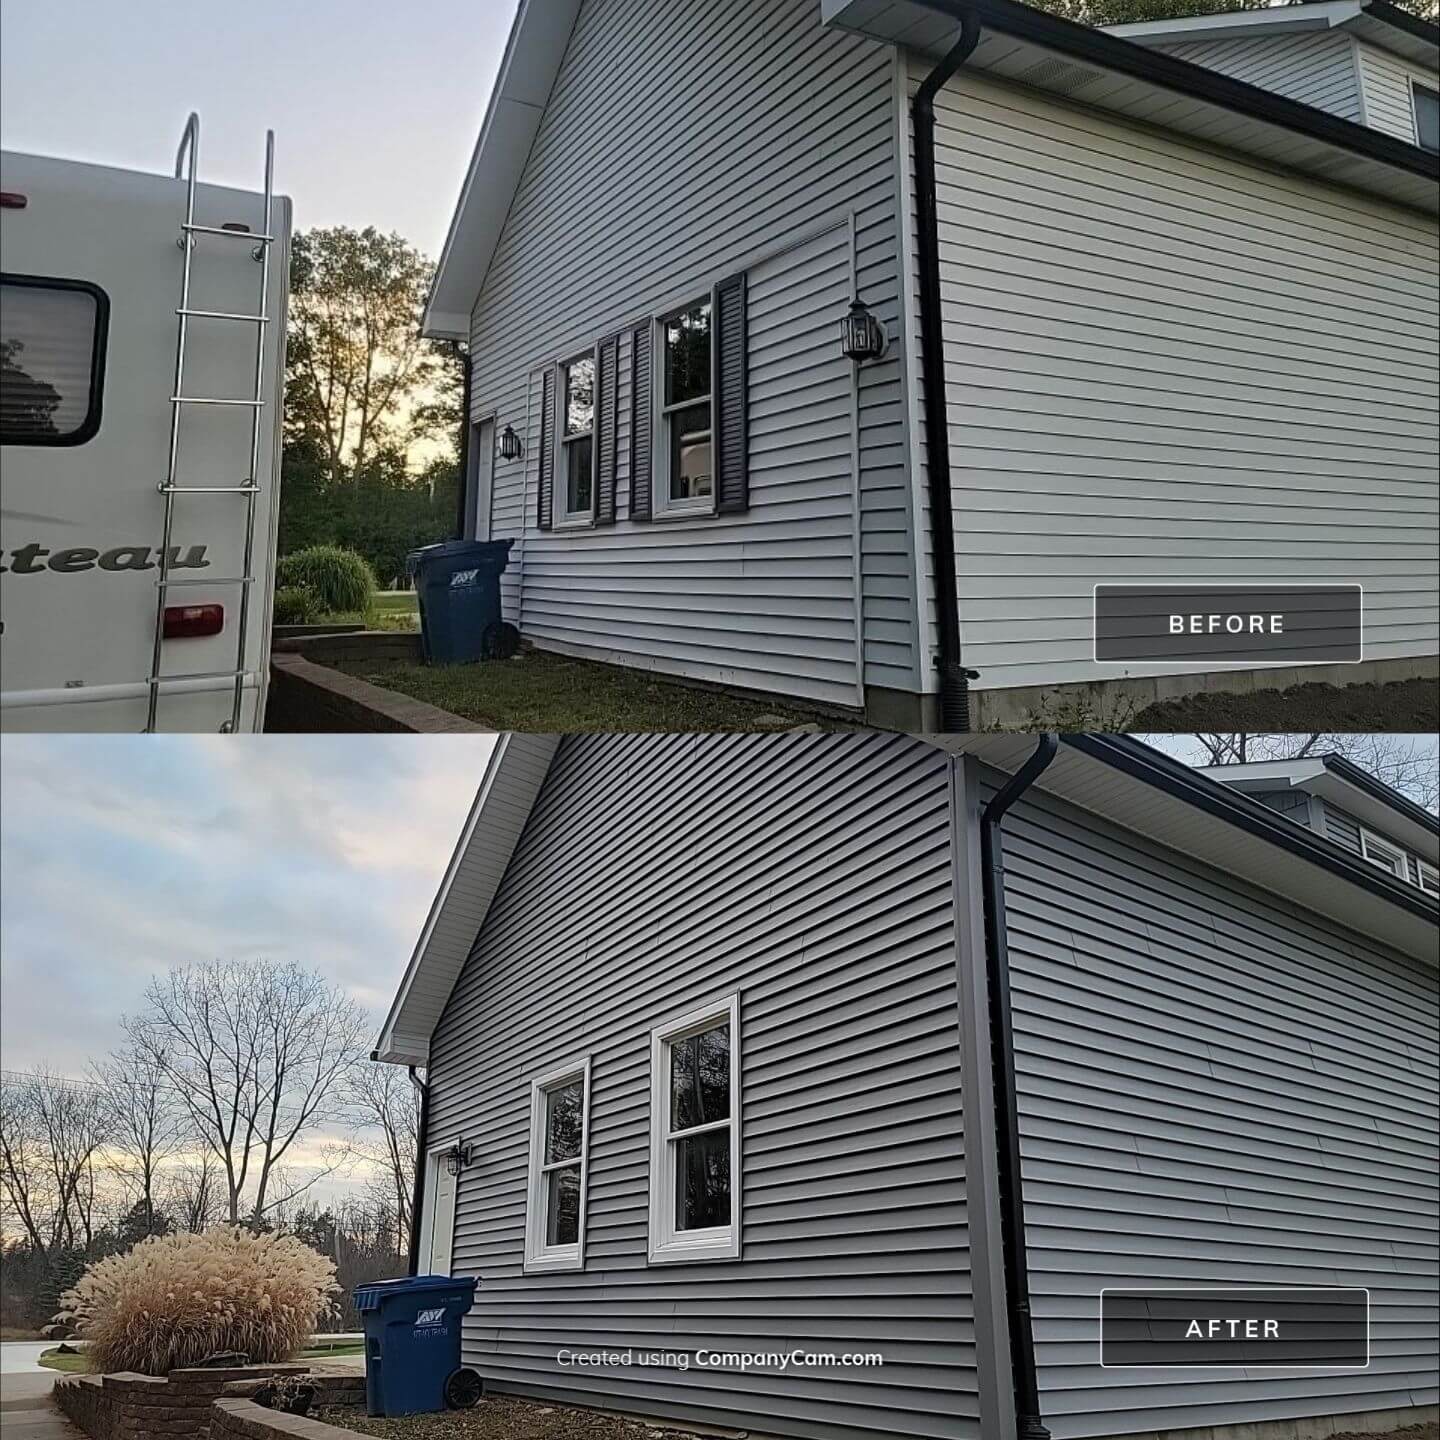 Before and after of home with new siding